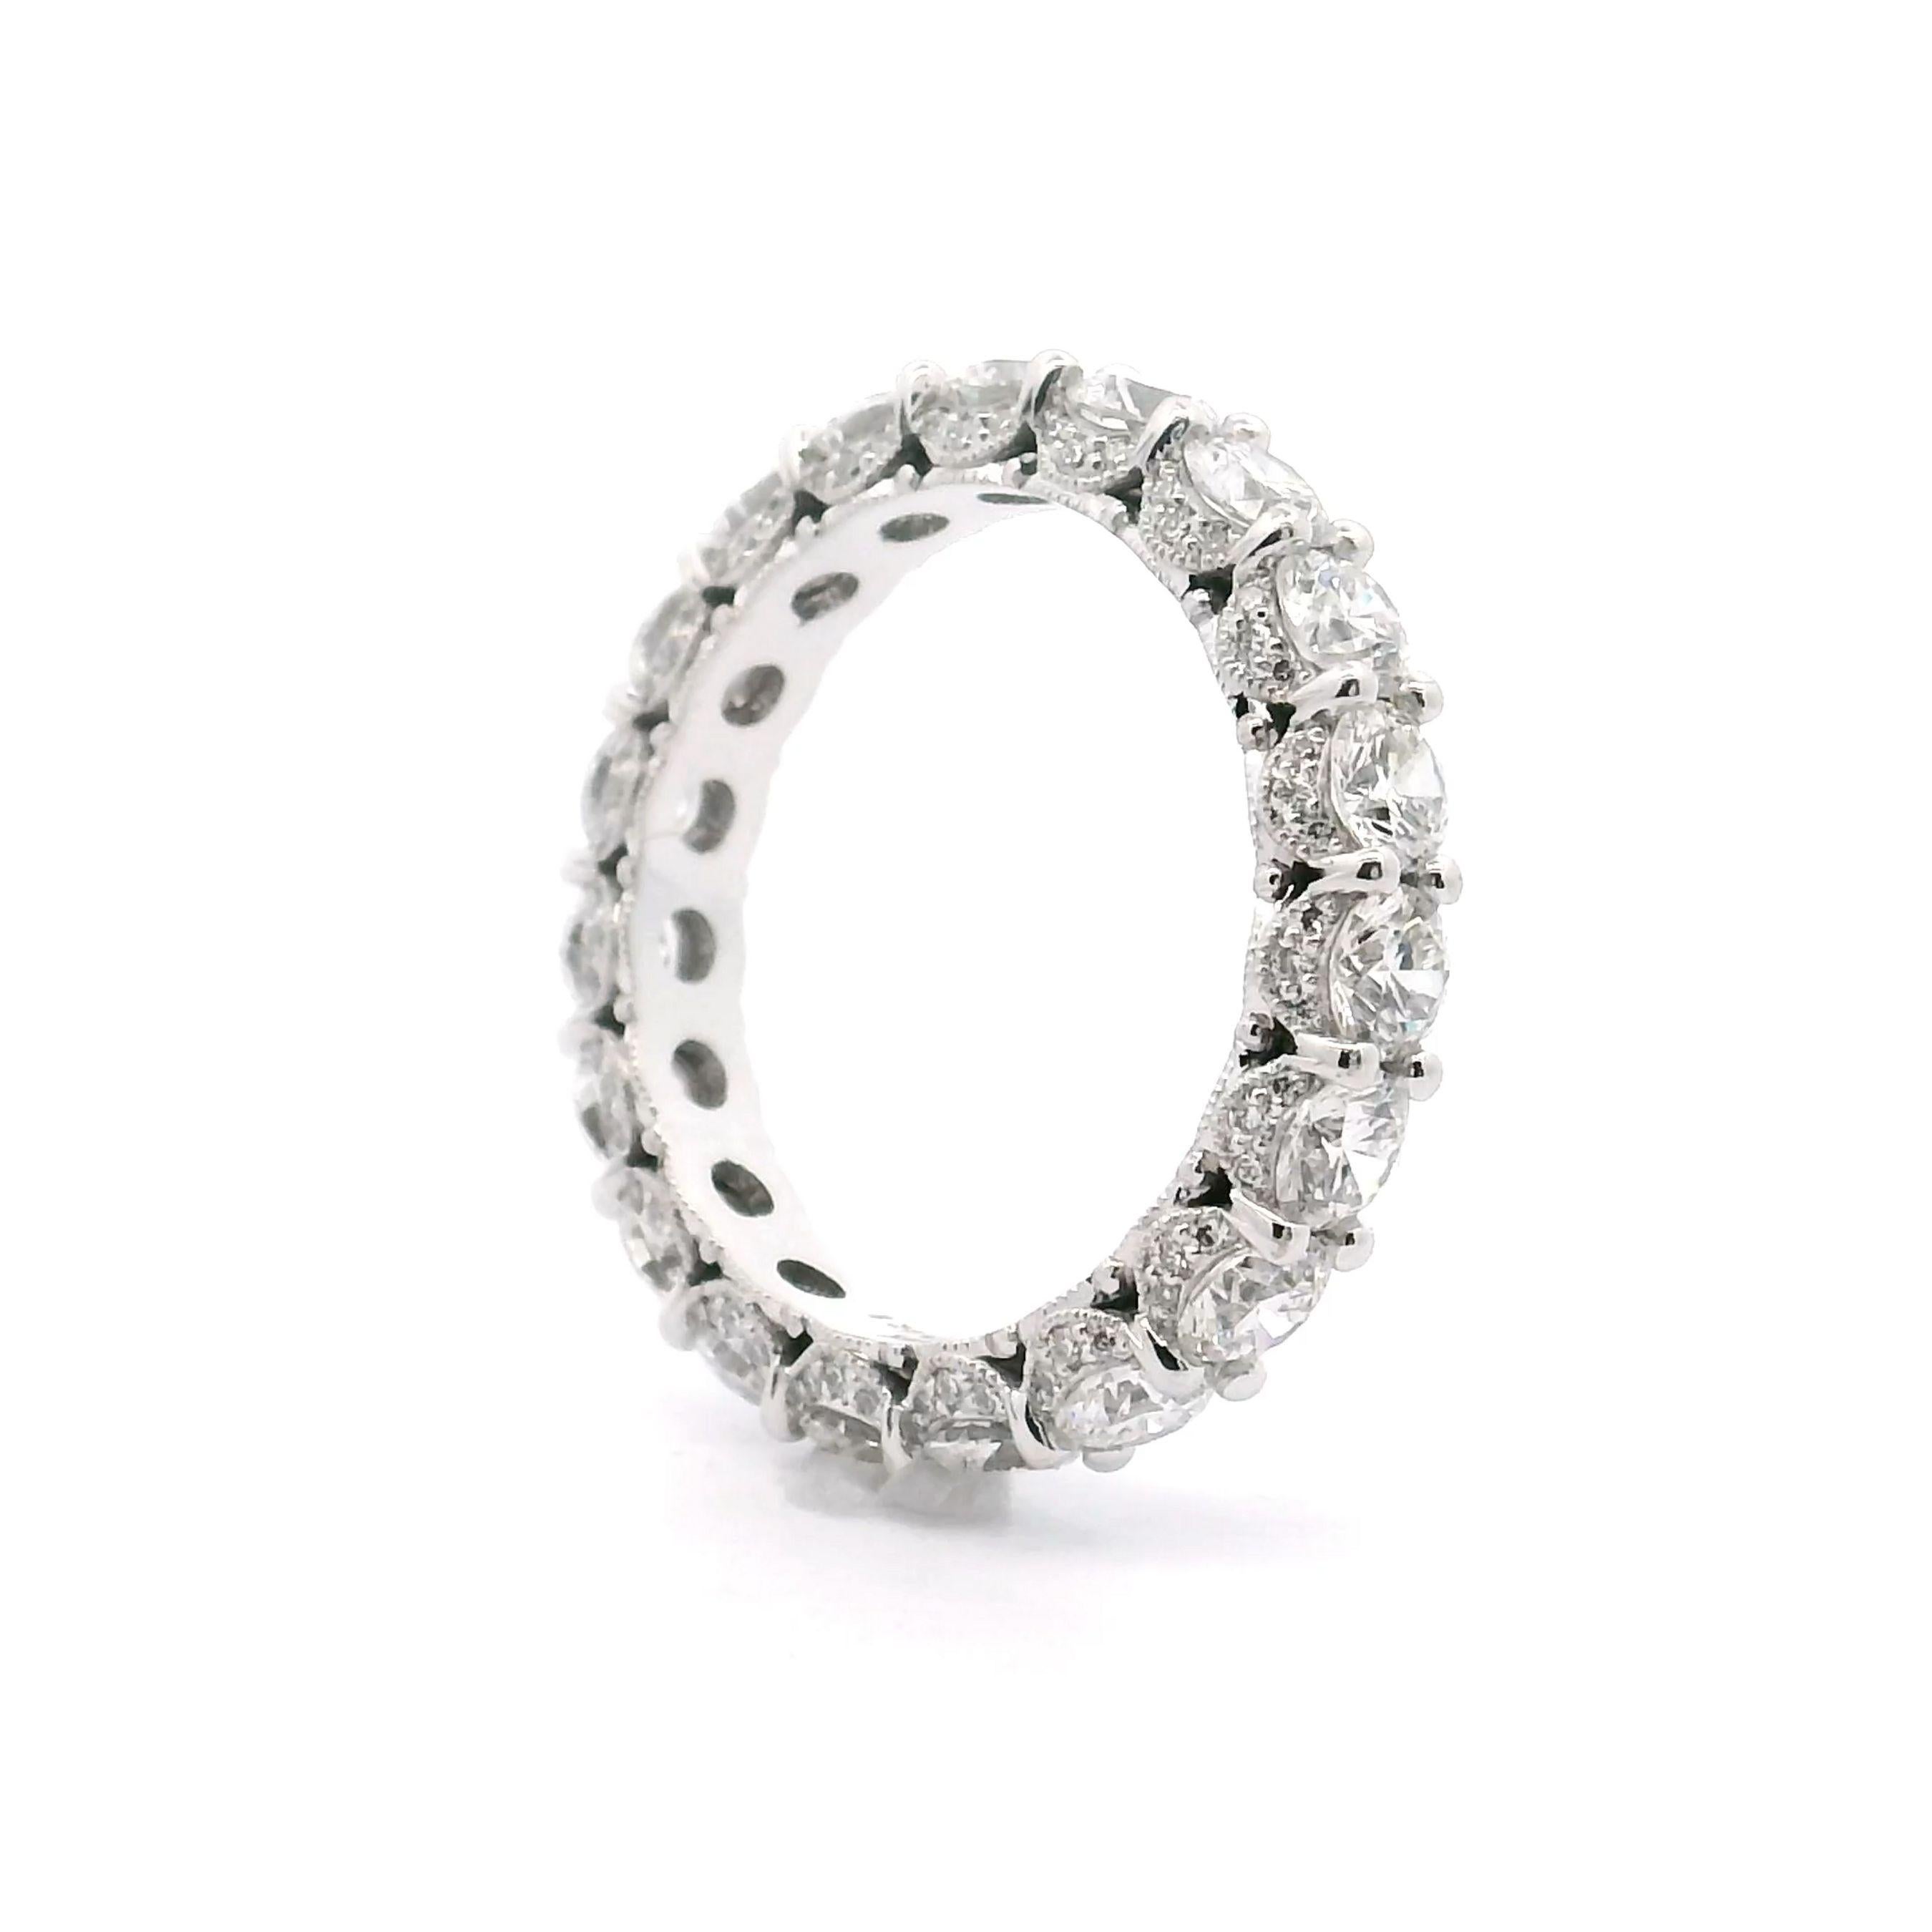 Contemporary Tacori HT2632 18k White Gold Eternity Ring, Round diamonds 3.20 carats, Size 6.5 For Sale